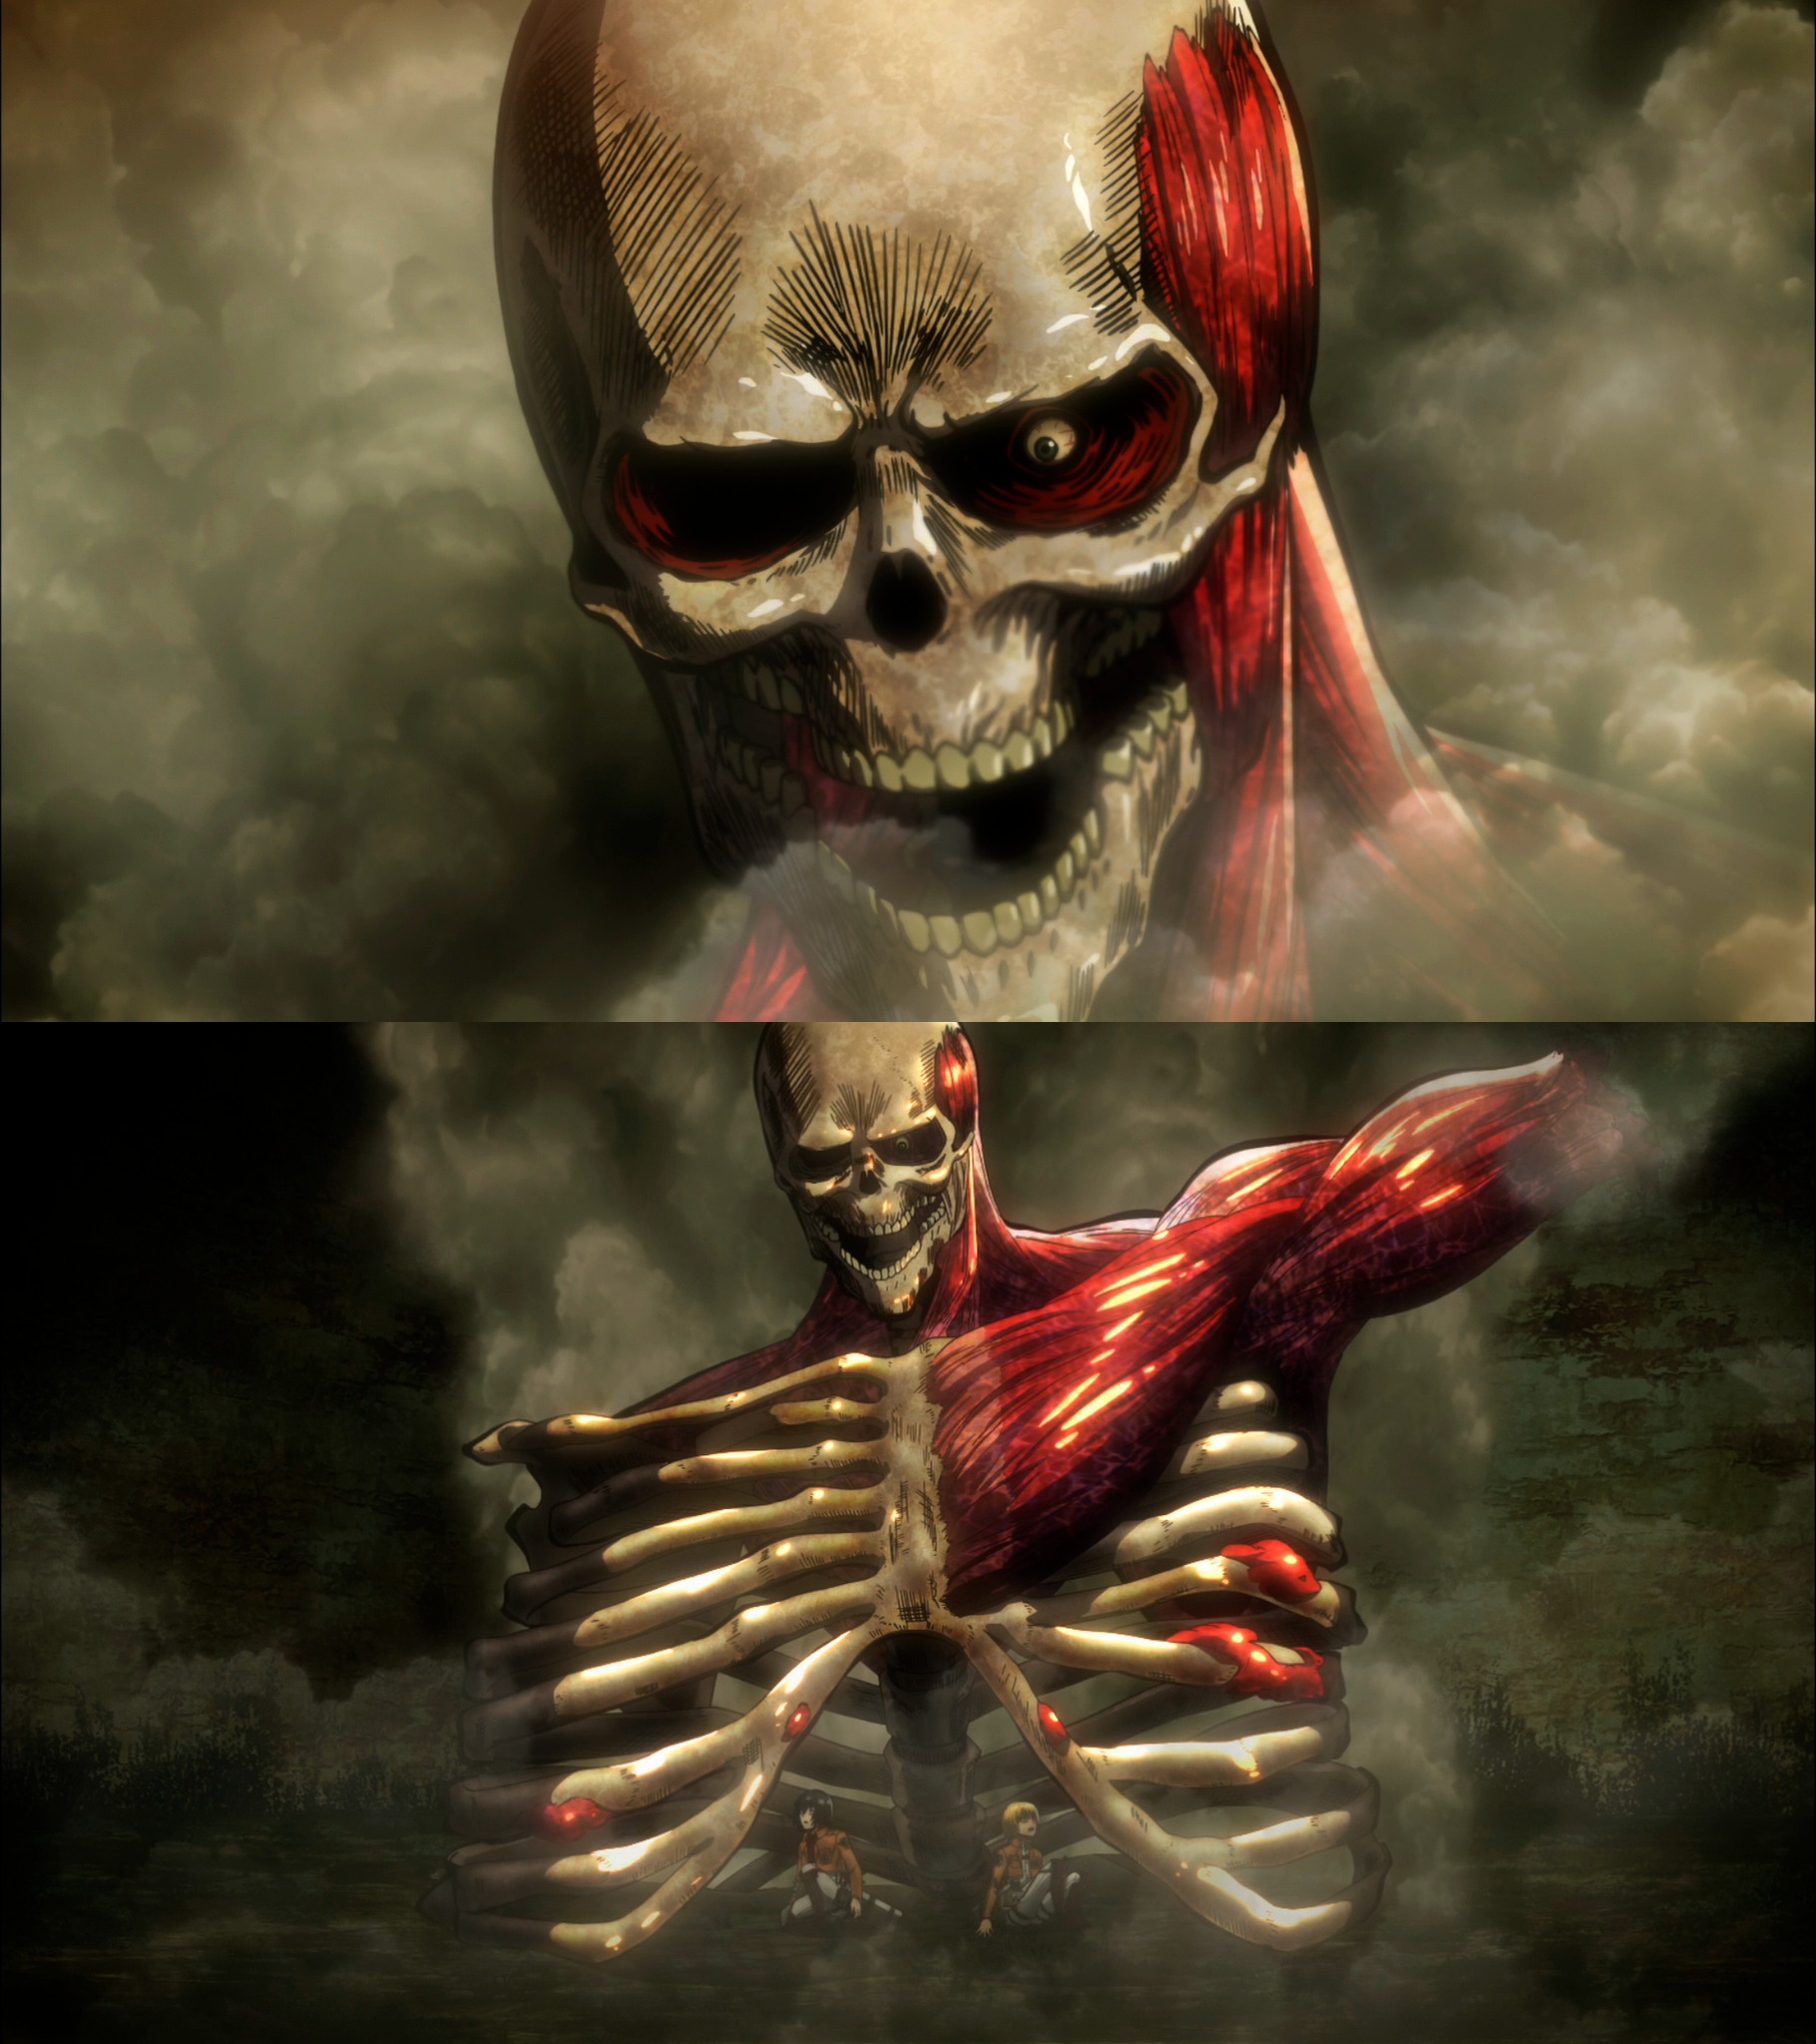 Attack on Titan Attack on Titan Final Season THE FINAL CHAPTERS Special 1 -  Assista na Crunchyroll